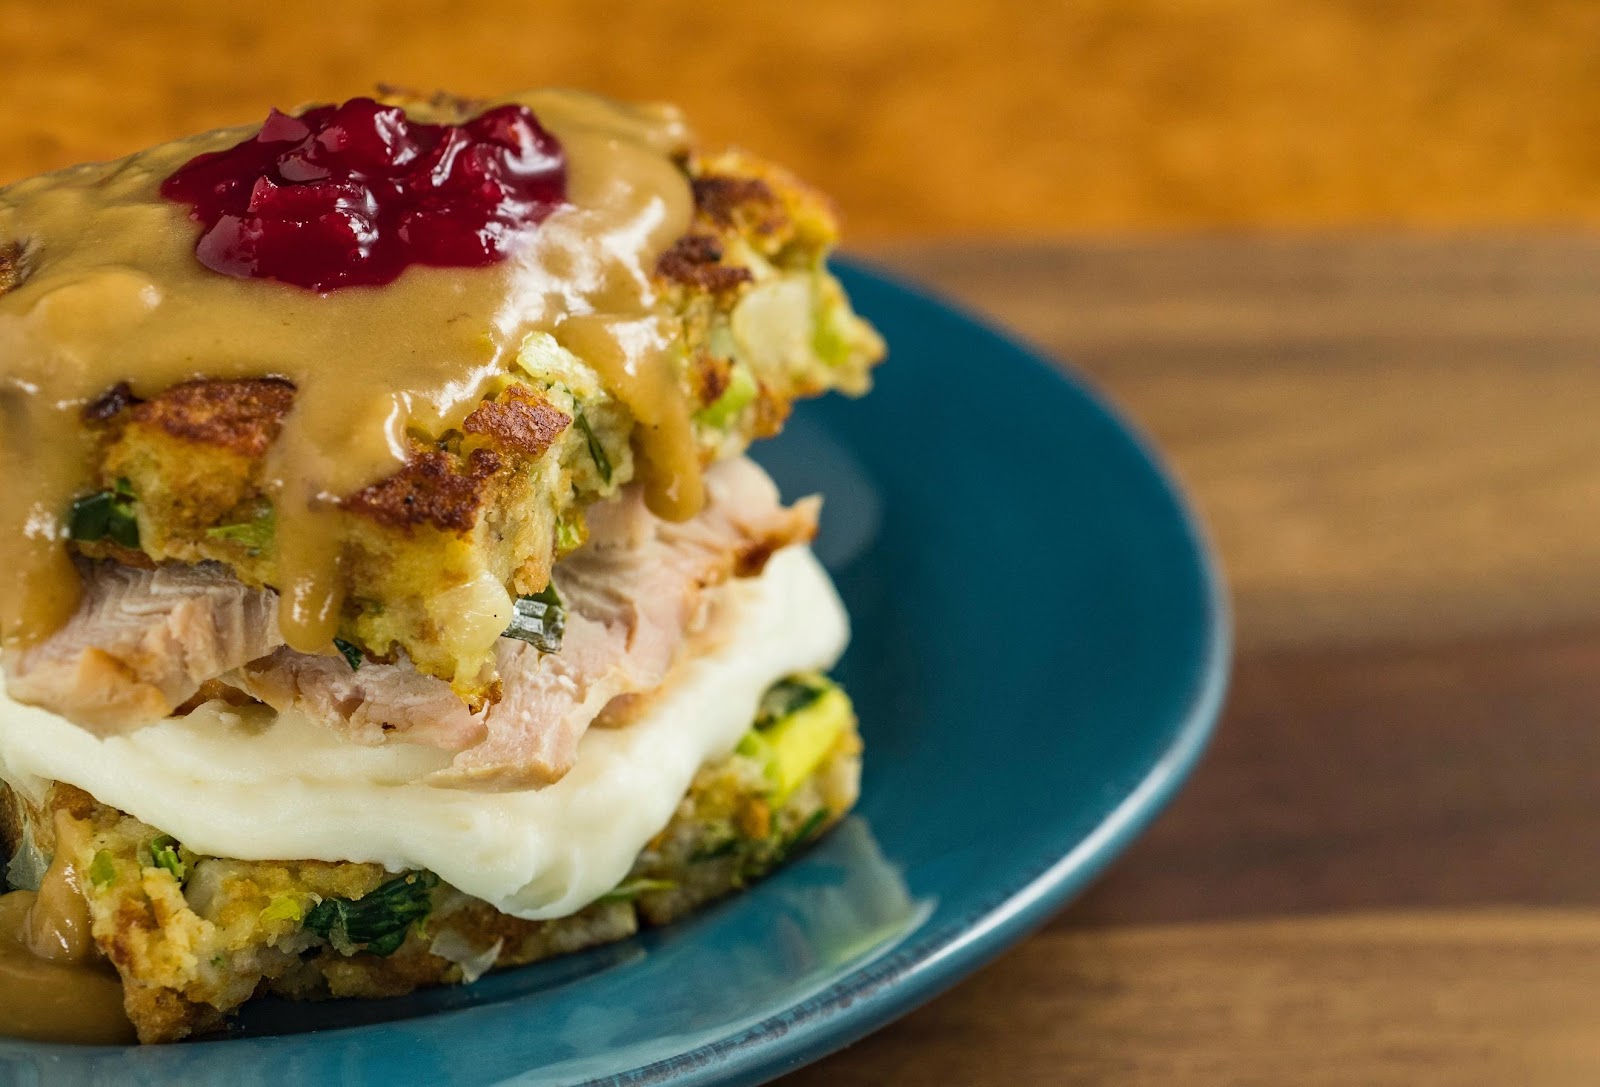 #DisneyMagicMoments: Cooking Up the Magic — Grab Your Waffle Iron to Make Our Recipe for Leftover Stuffing Waffles with Turkey, Gravy, and Homemade Cranberry Sauce